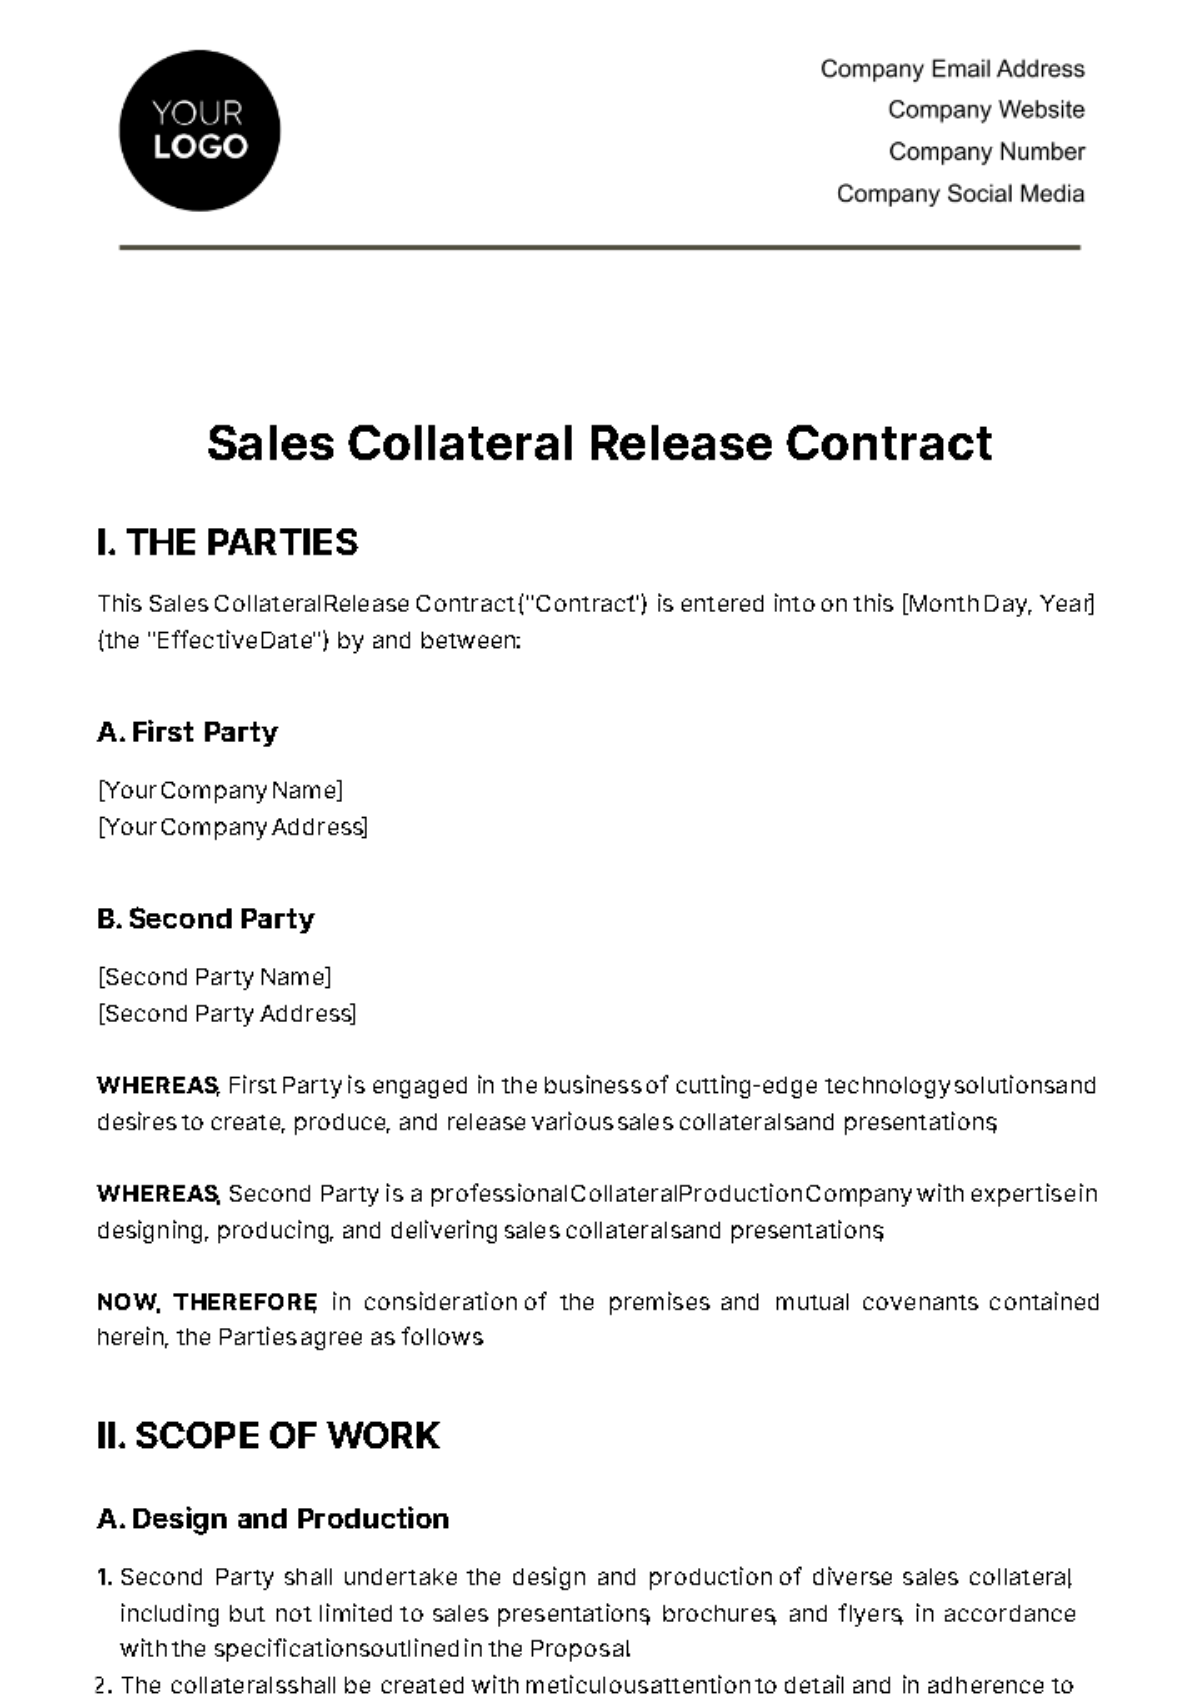 Free Sales Collateral Release Contract Template